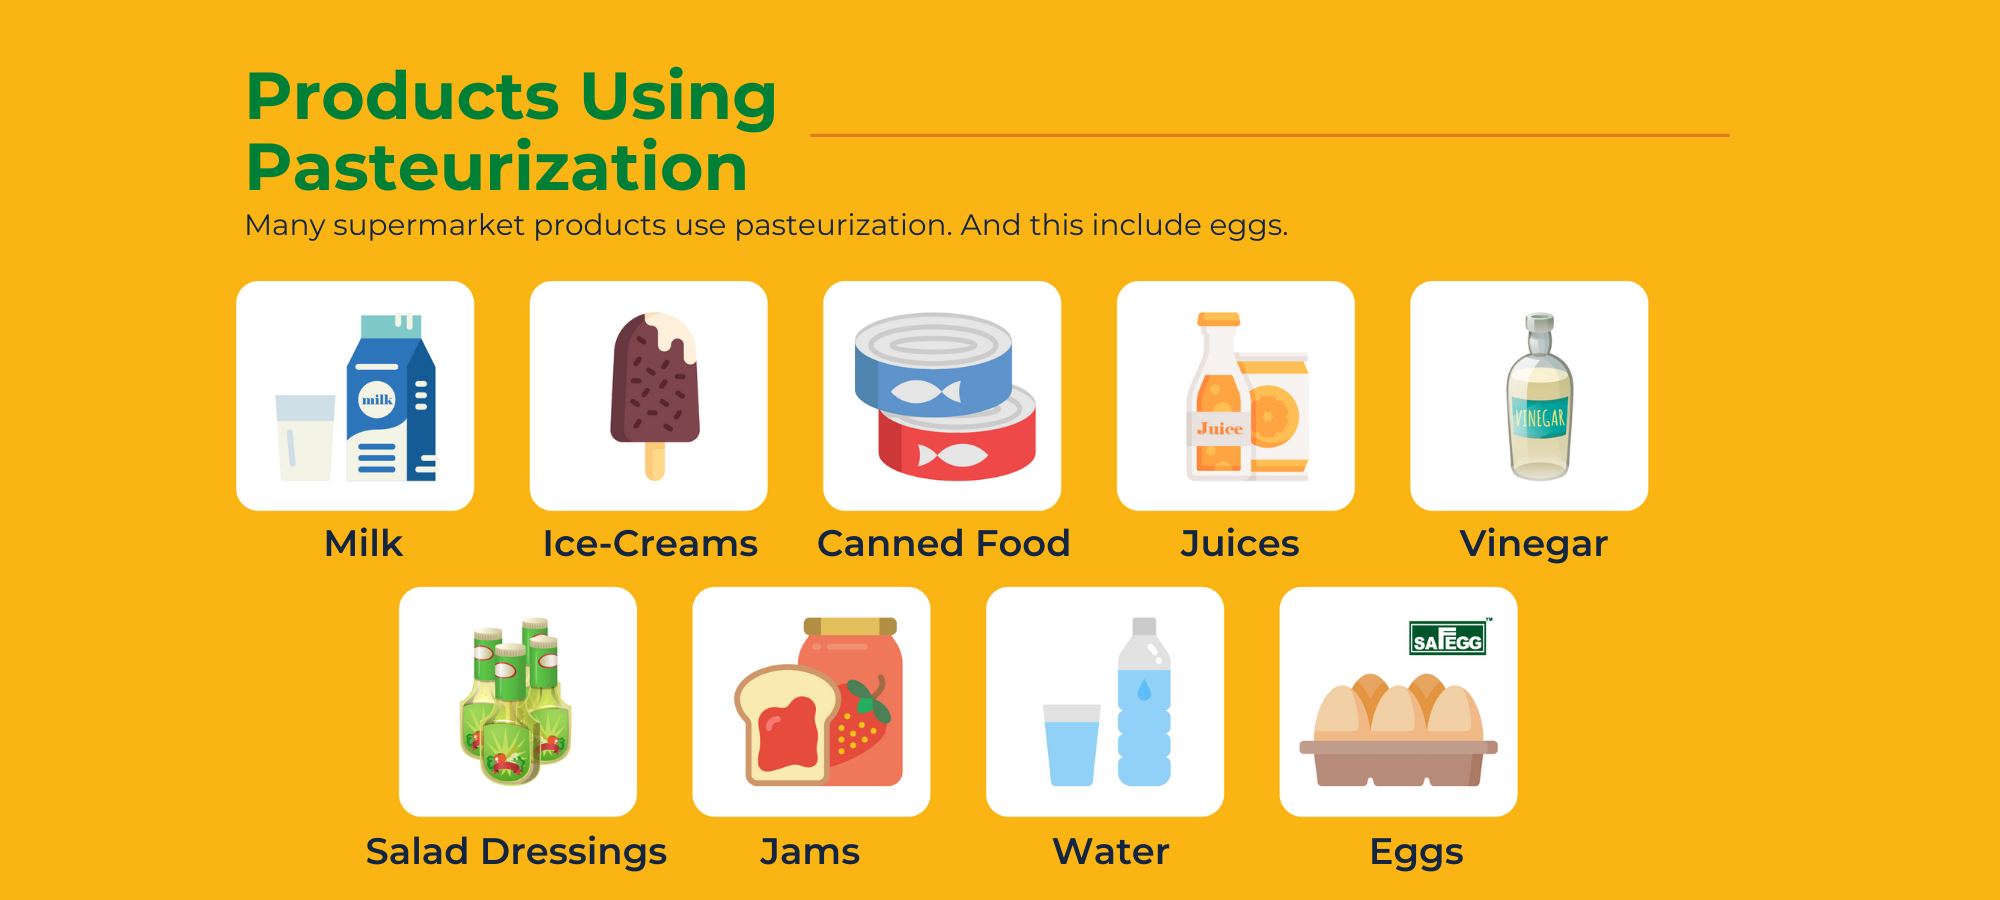 Products Using Pasteurization